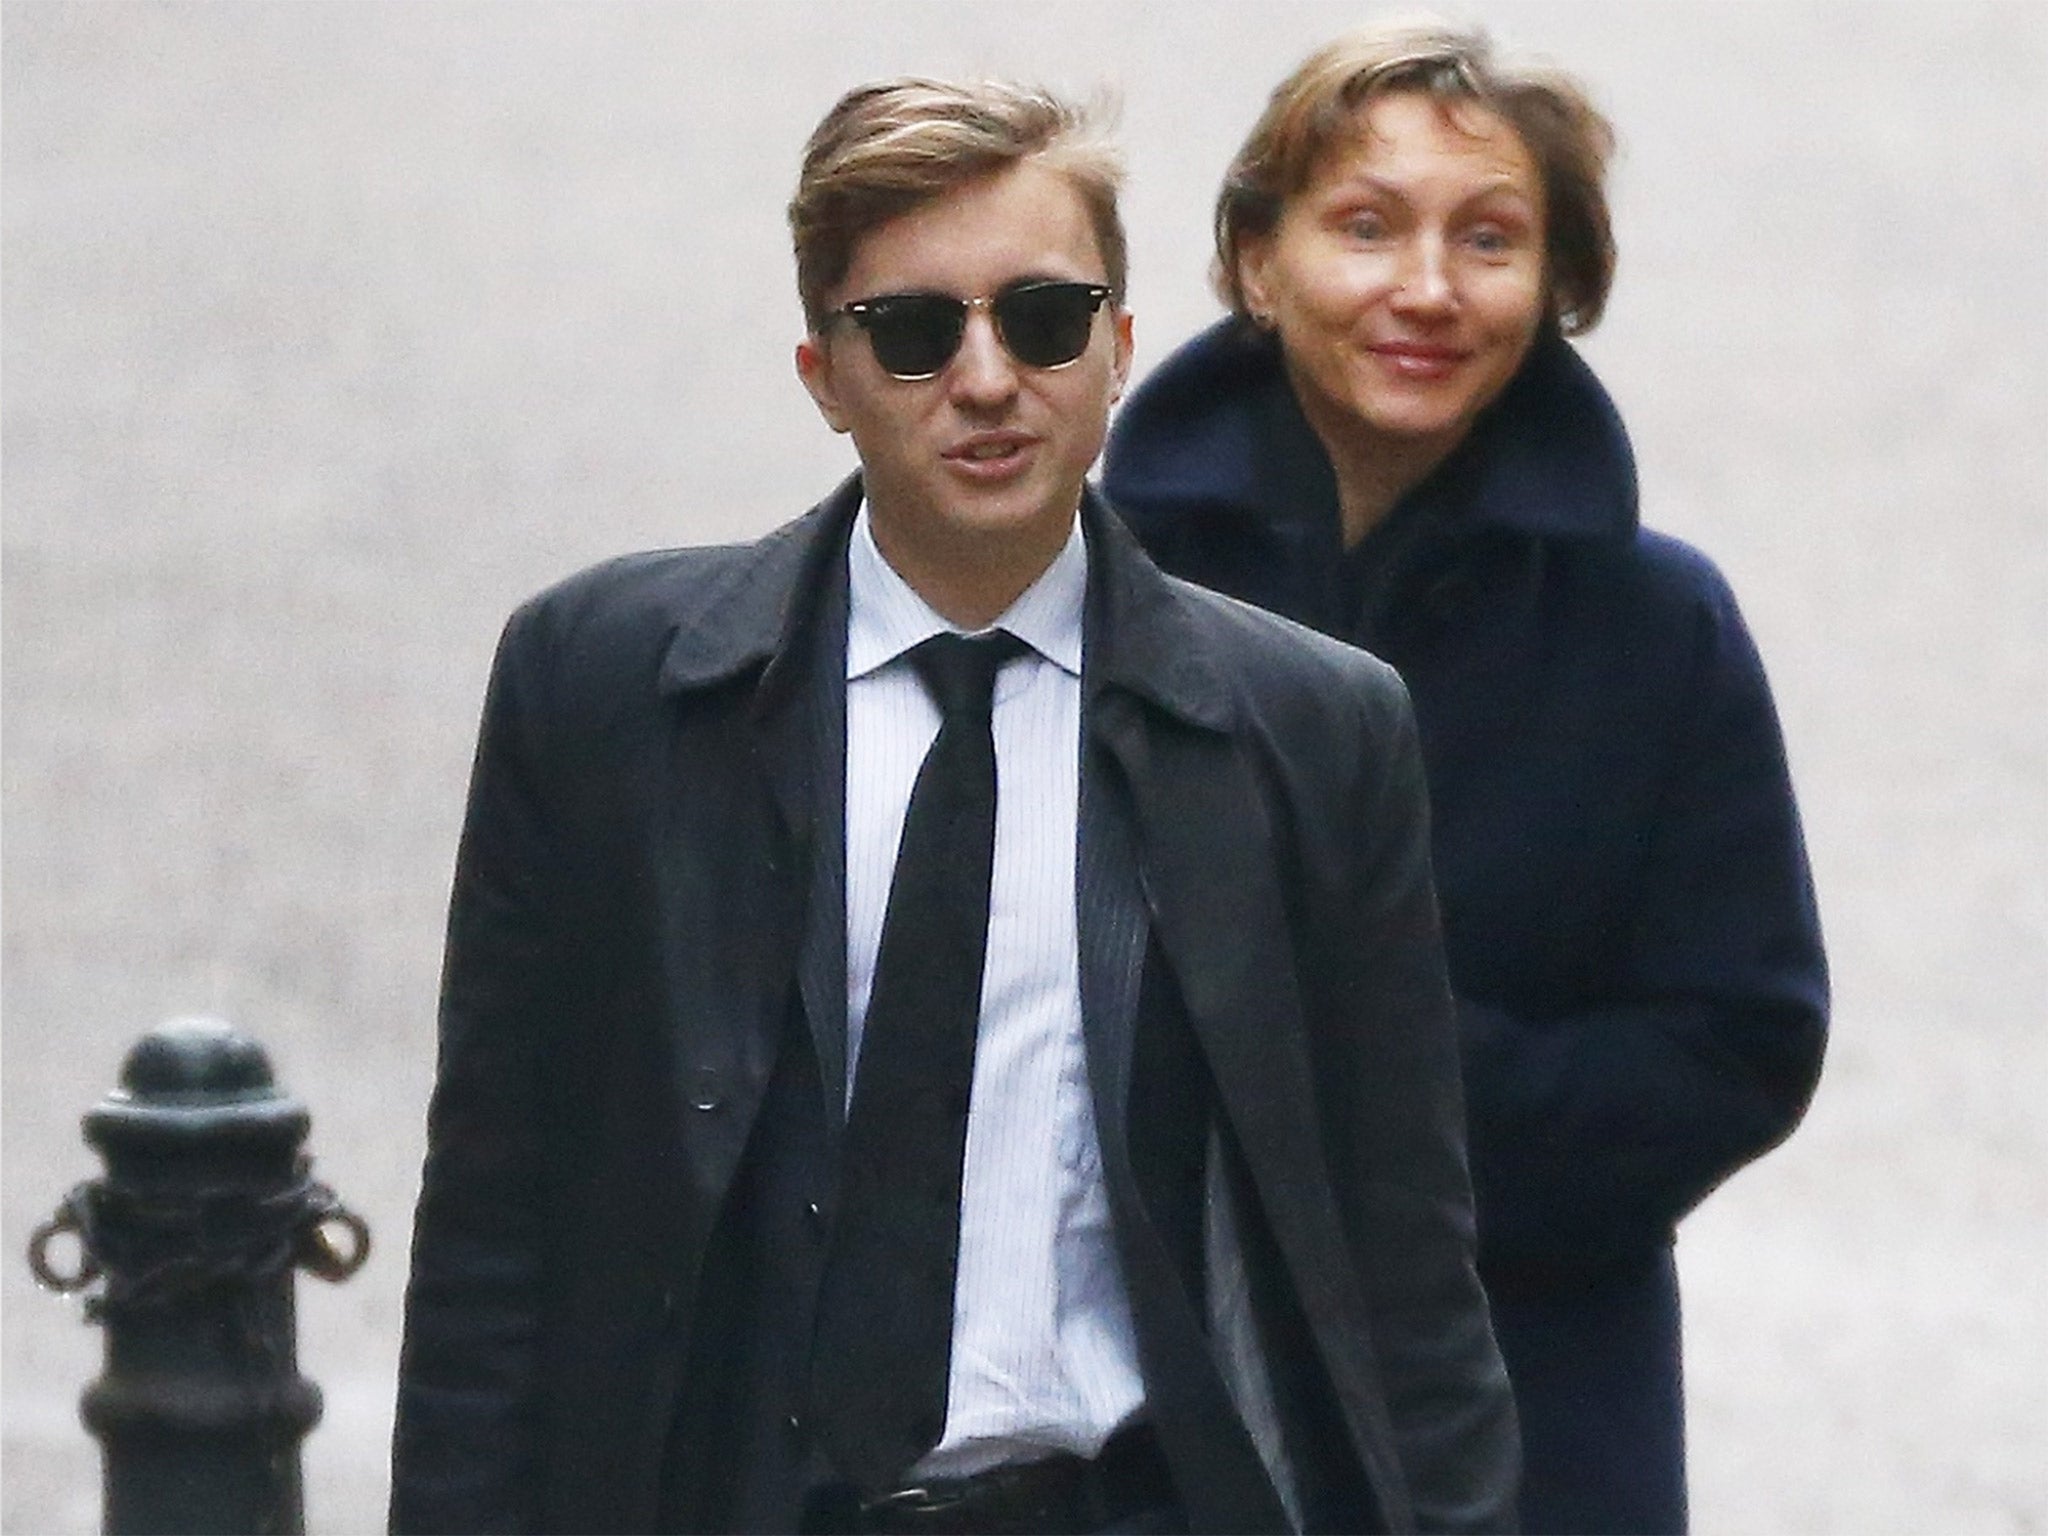 Anatoly Litvinenko, son of the murdered KGB agent, with his mother Marina at the High Court in London